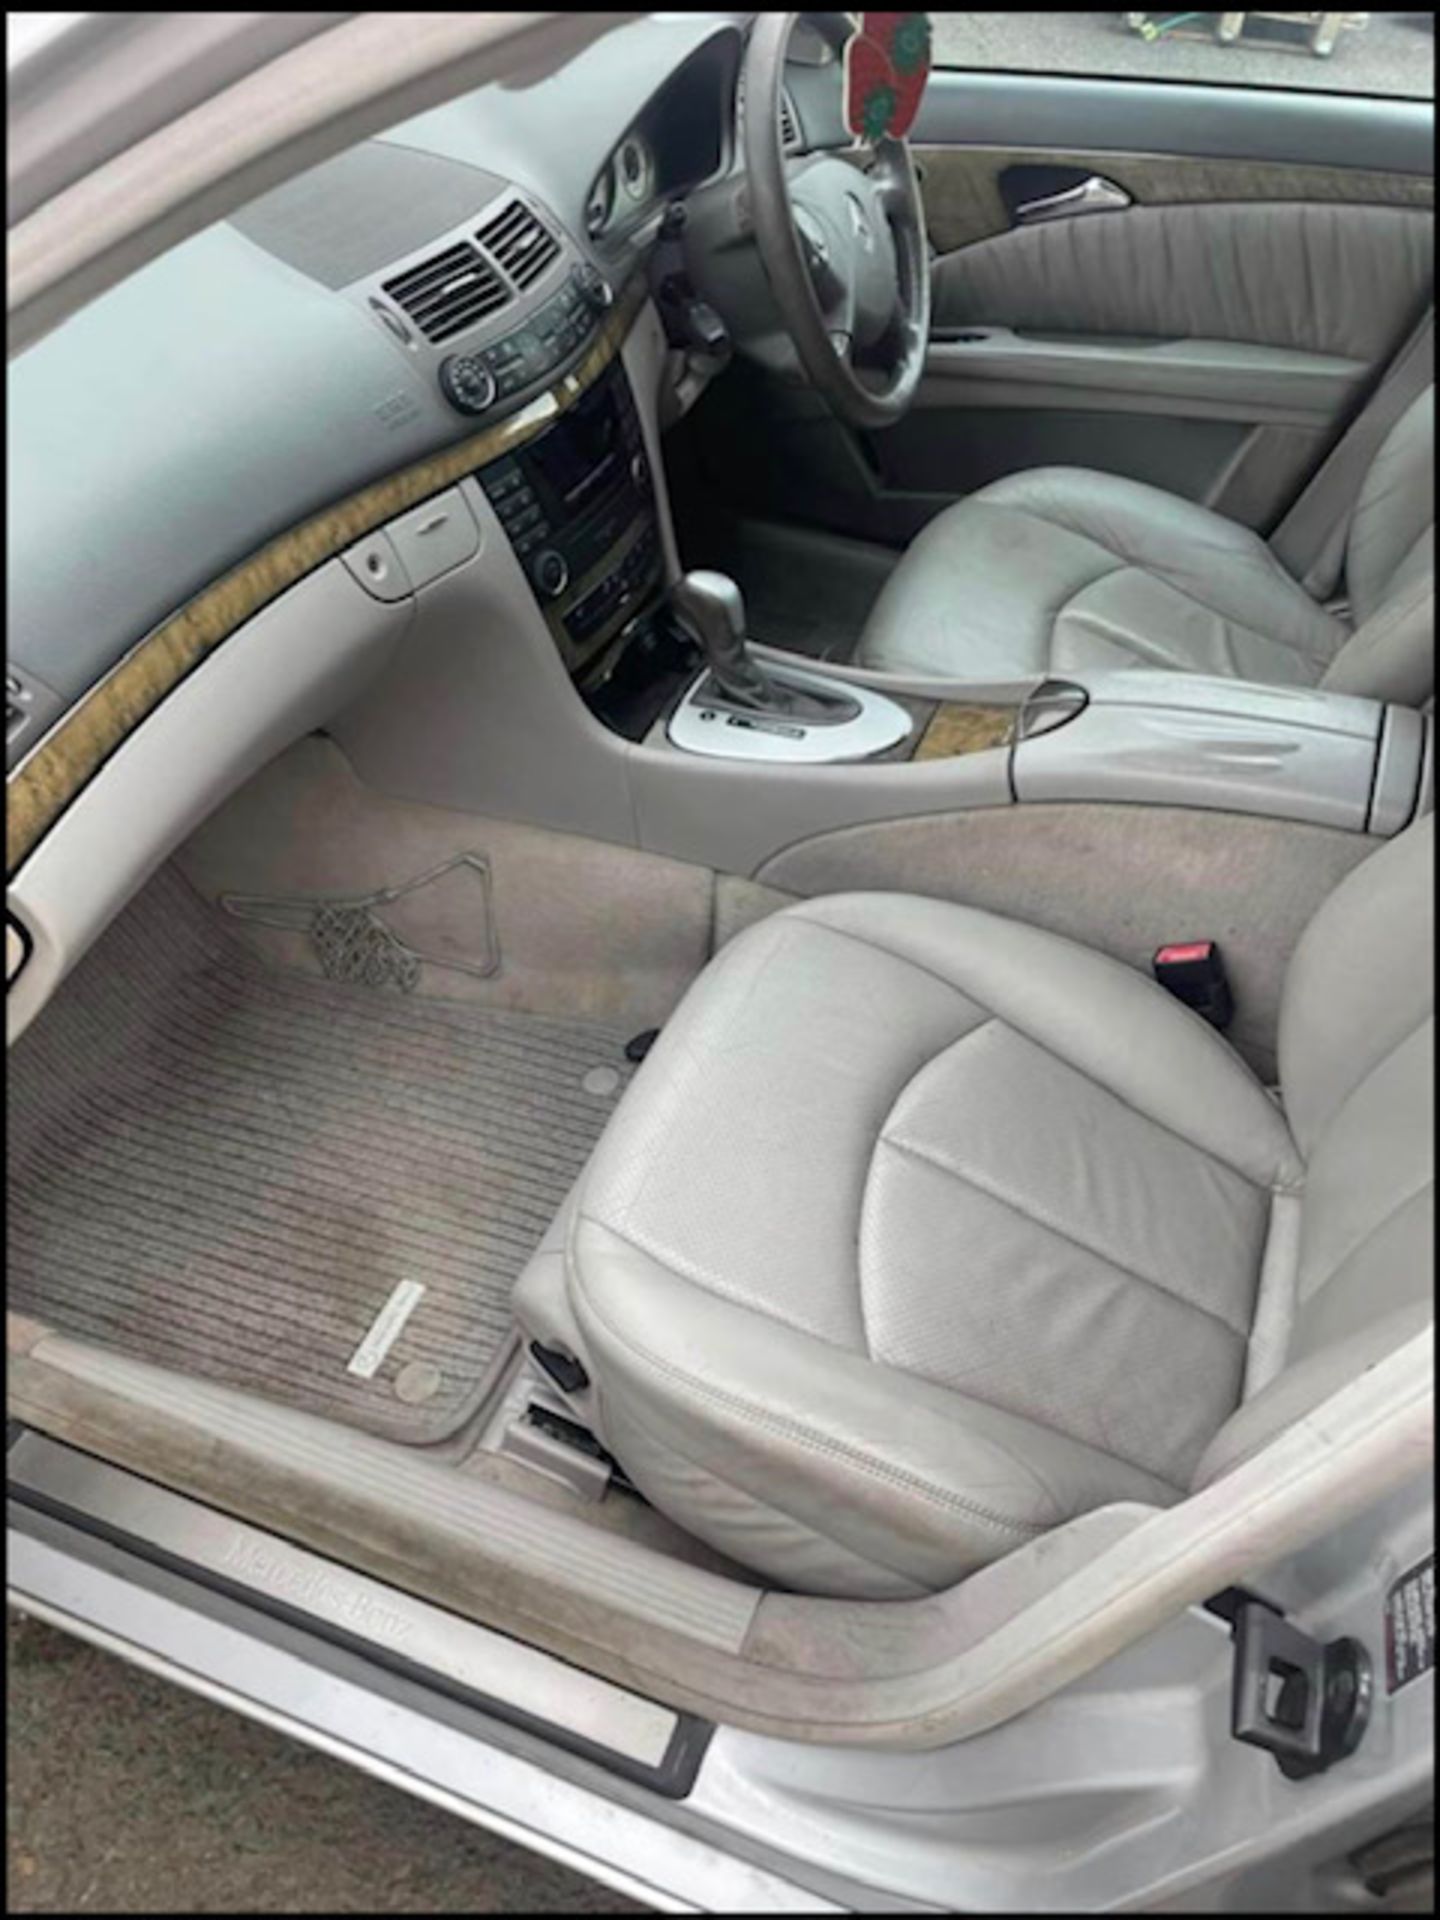 Mercedes E320 CDI 103k genuine miles ,as per pictures has scratches as shown in photos but is all in - Image 11 of 14